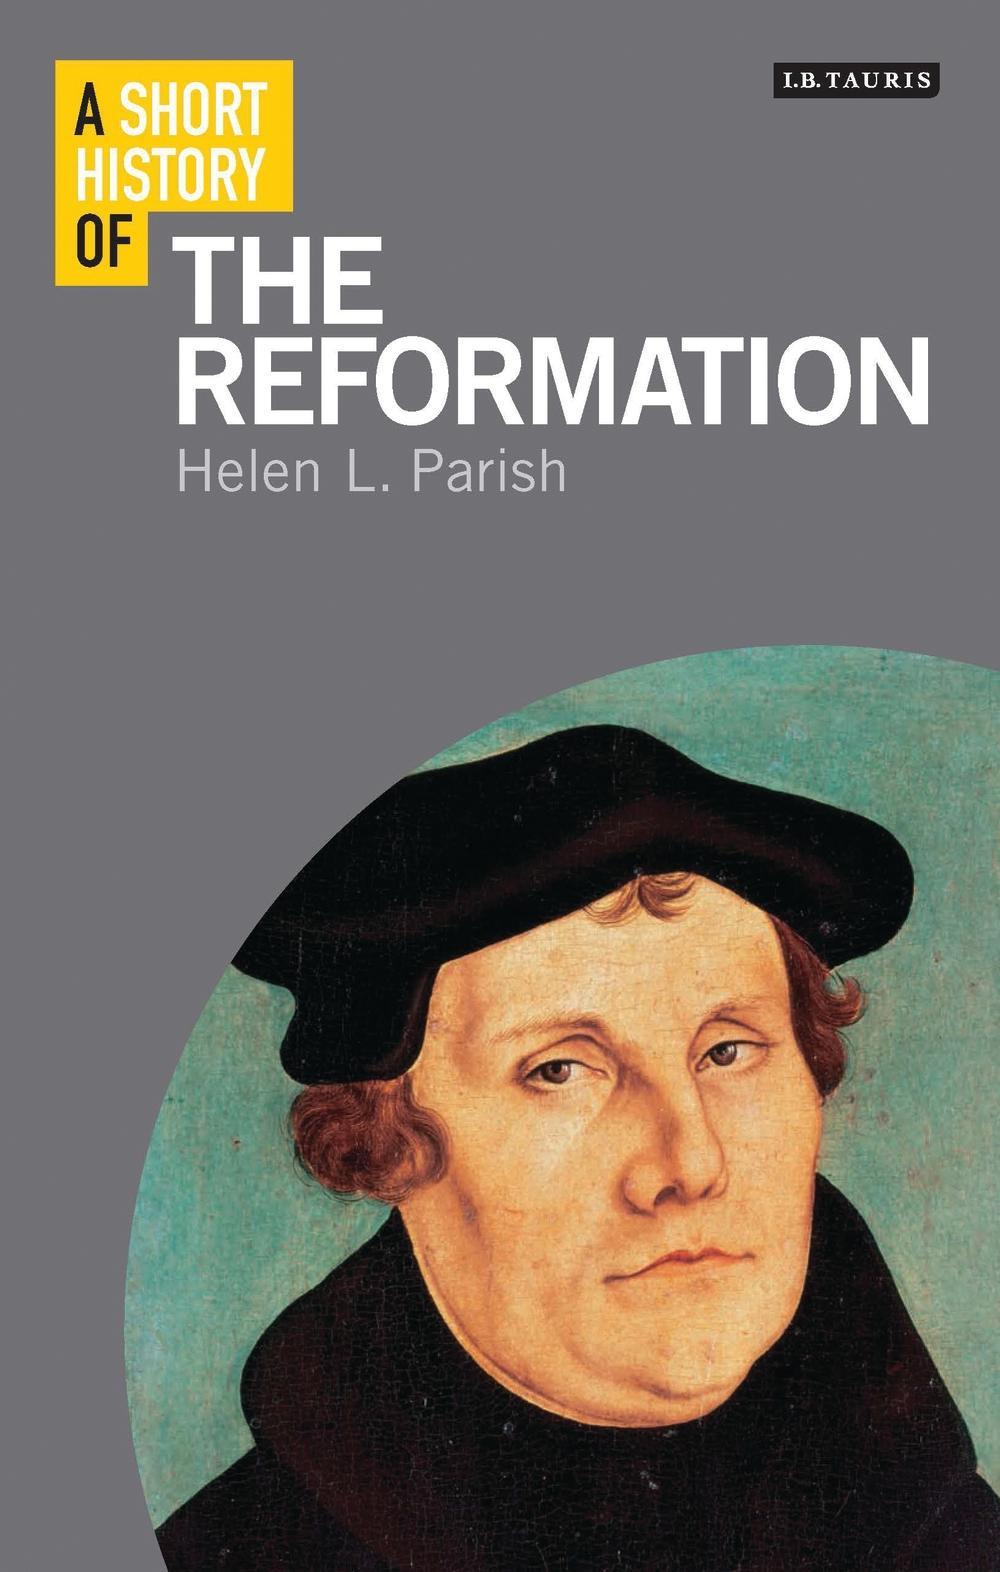 Short History of the Reformation